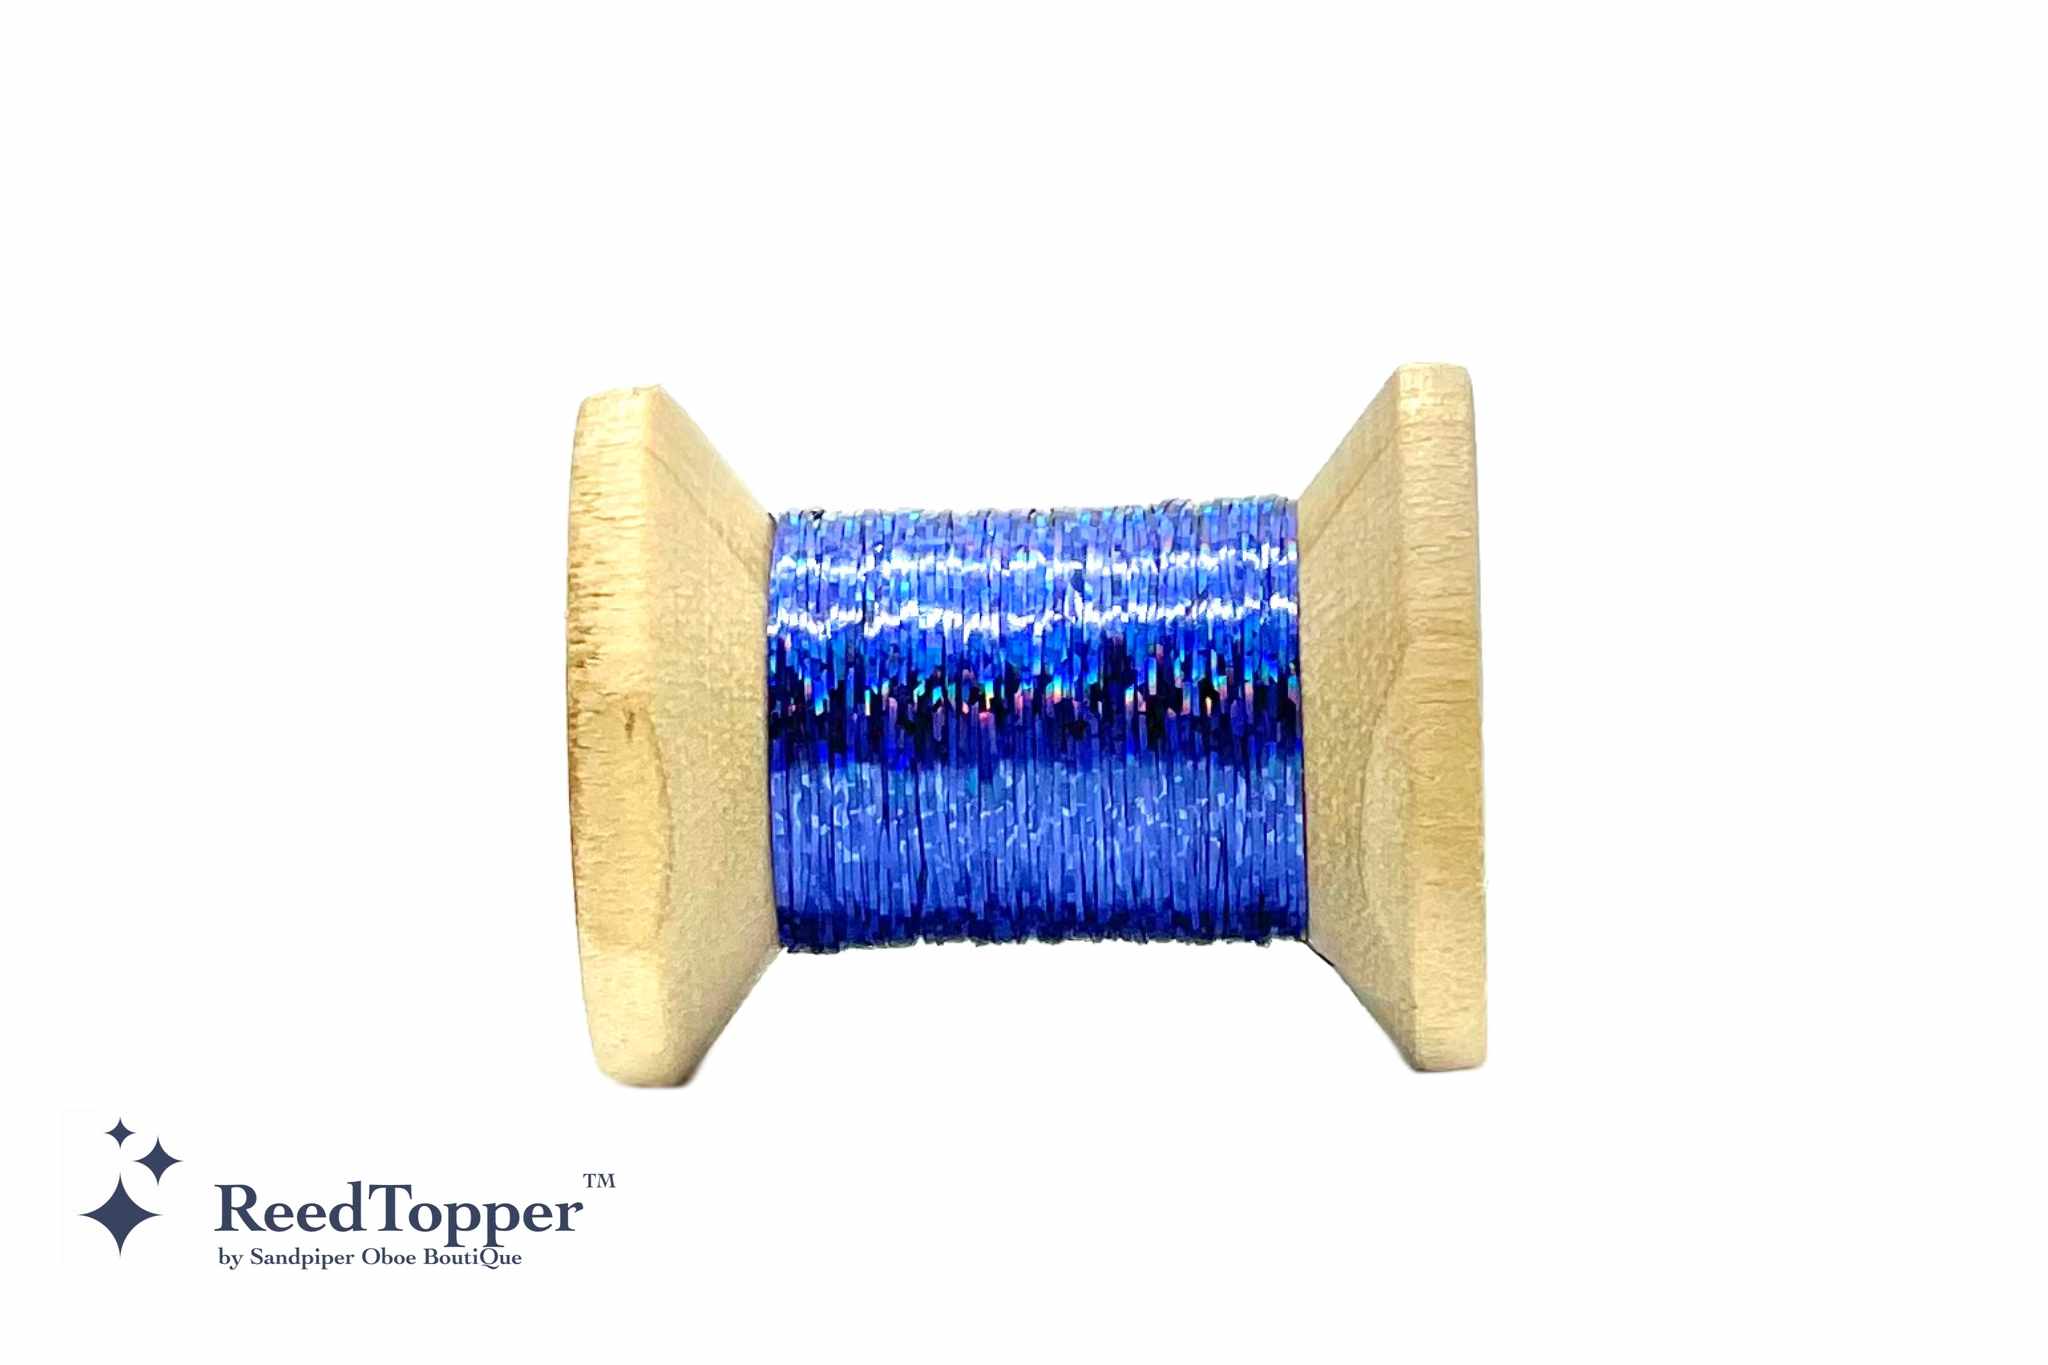 TINSEL REED TOPPER